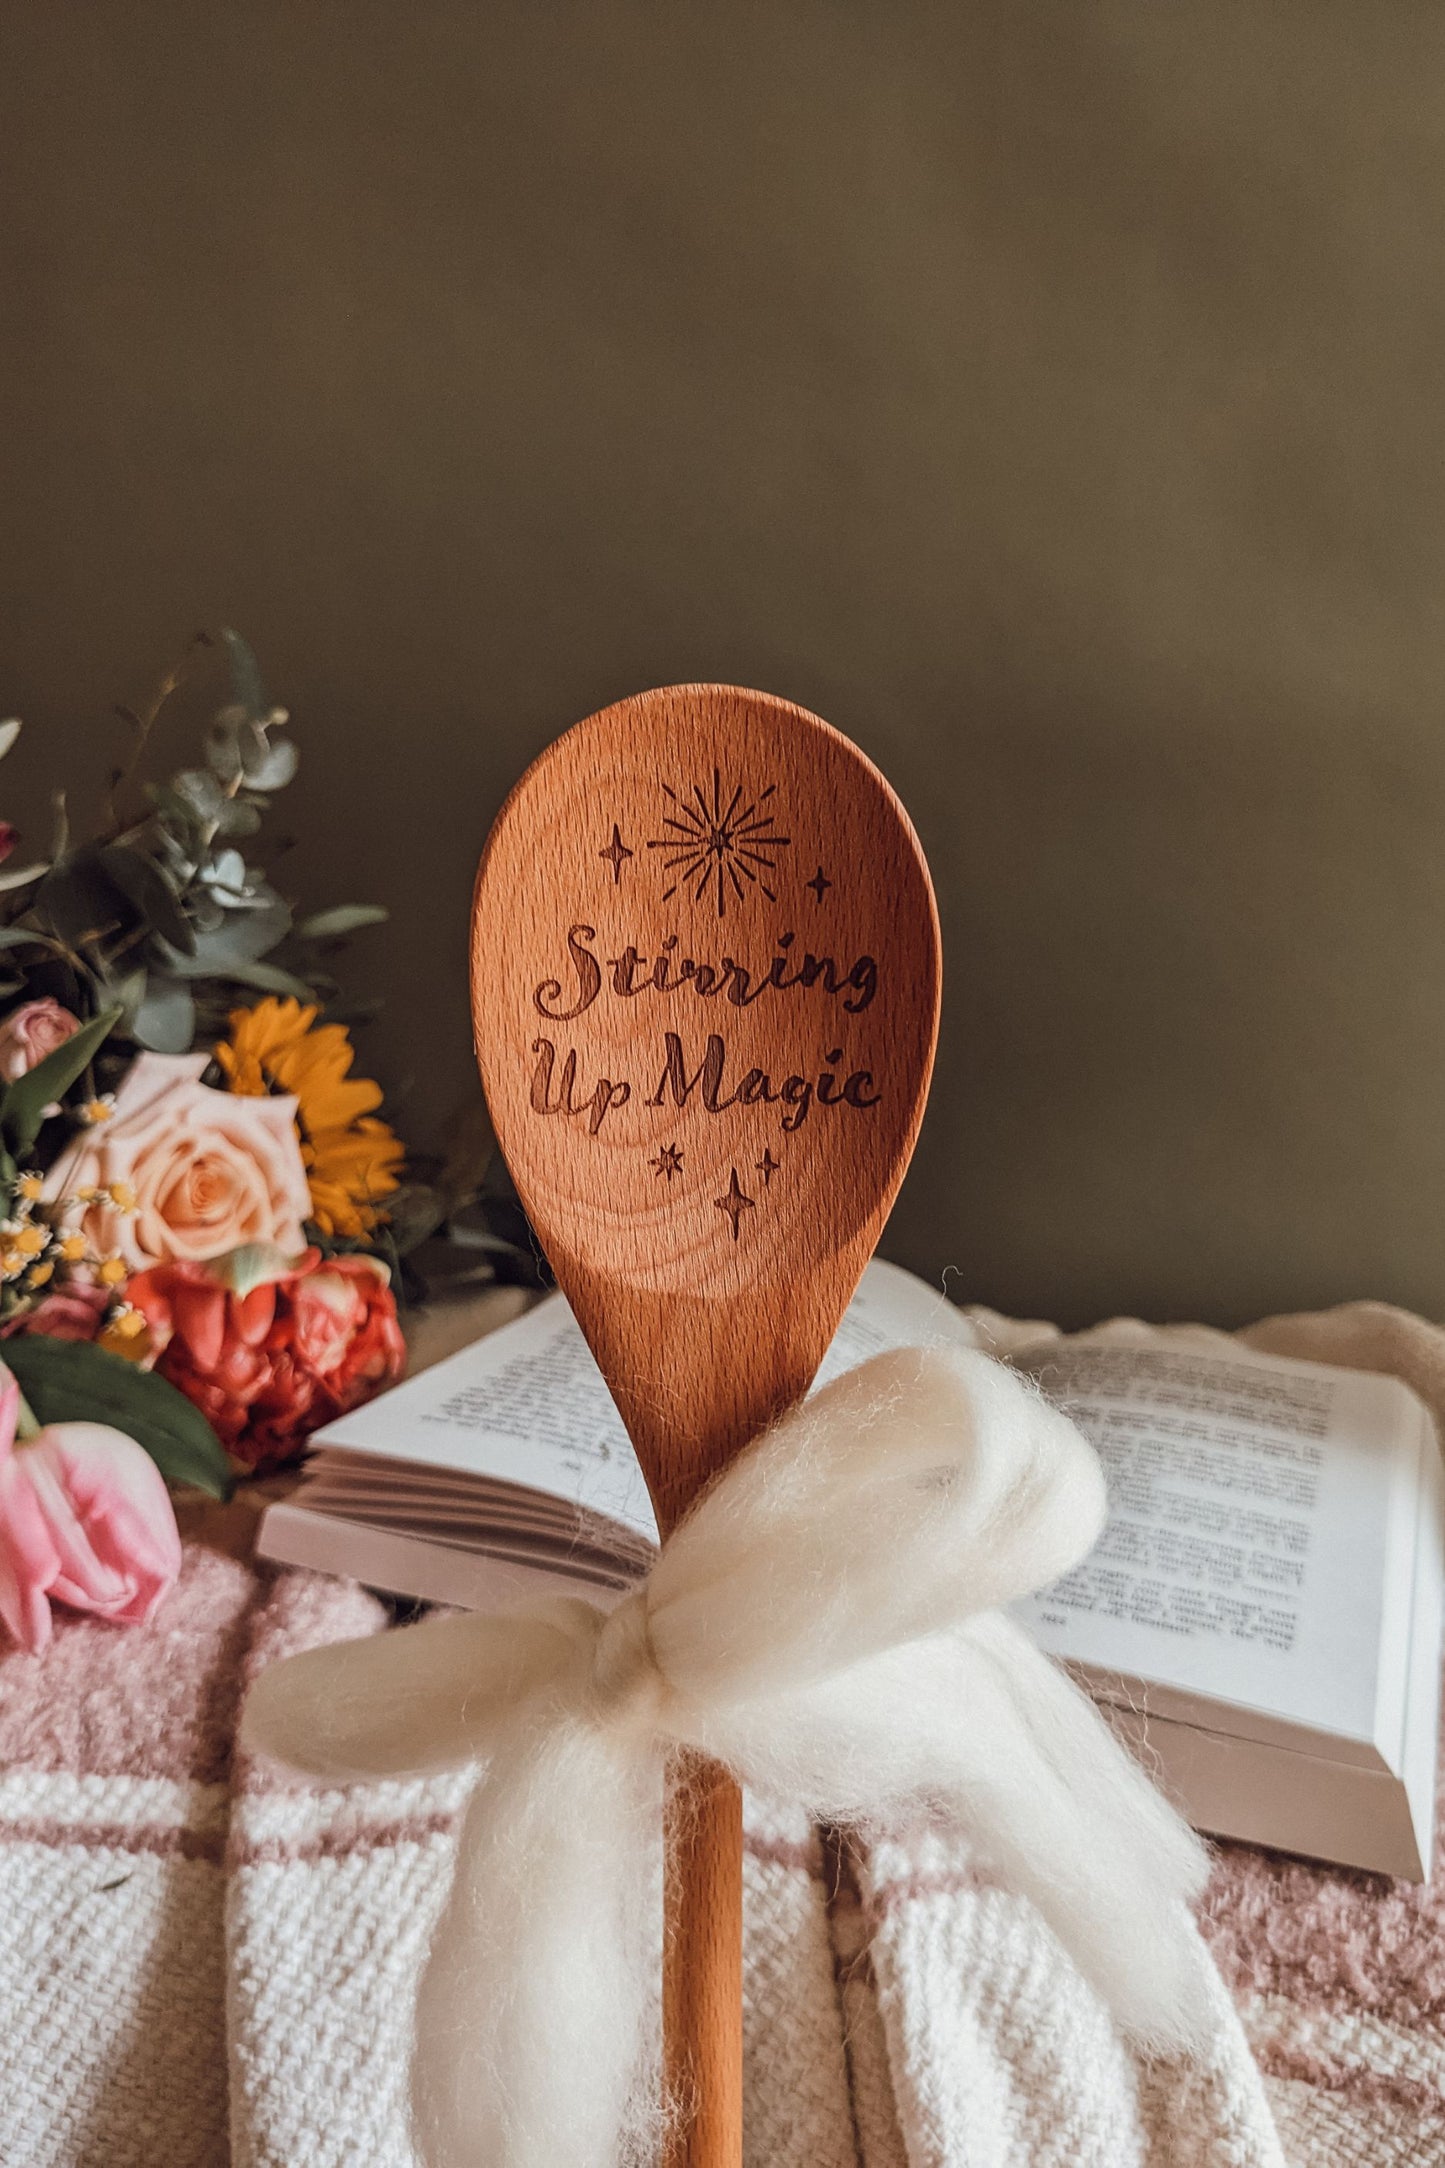 'Stirring Up Magic' Wooden Spoon